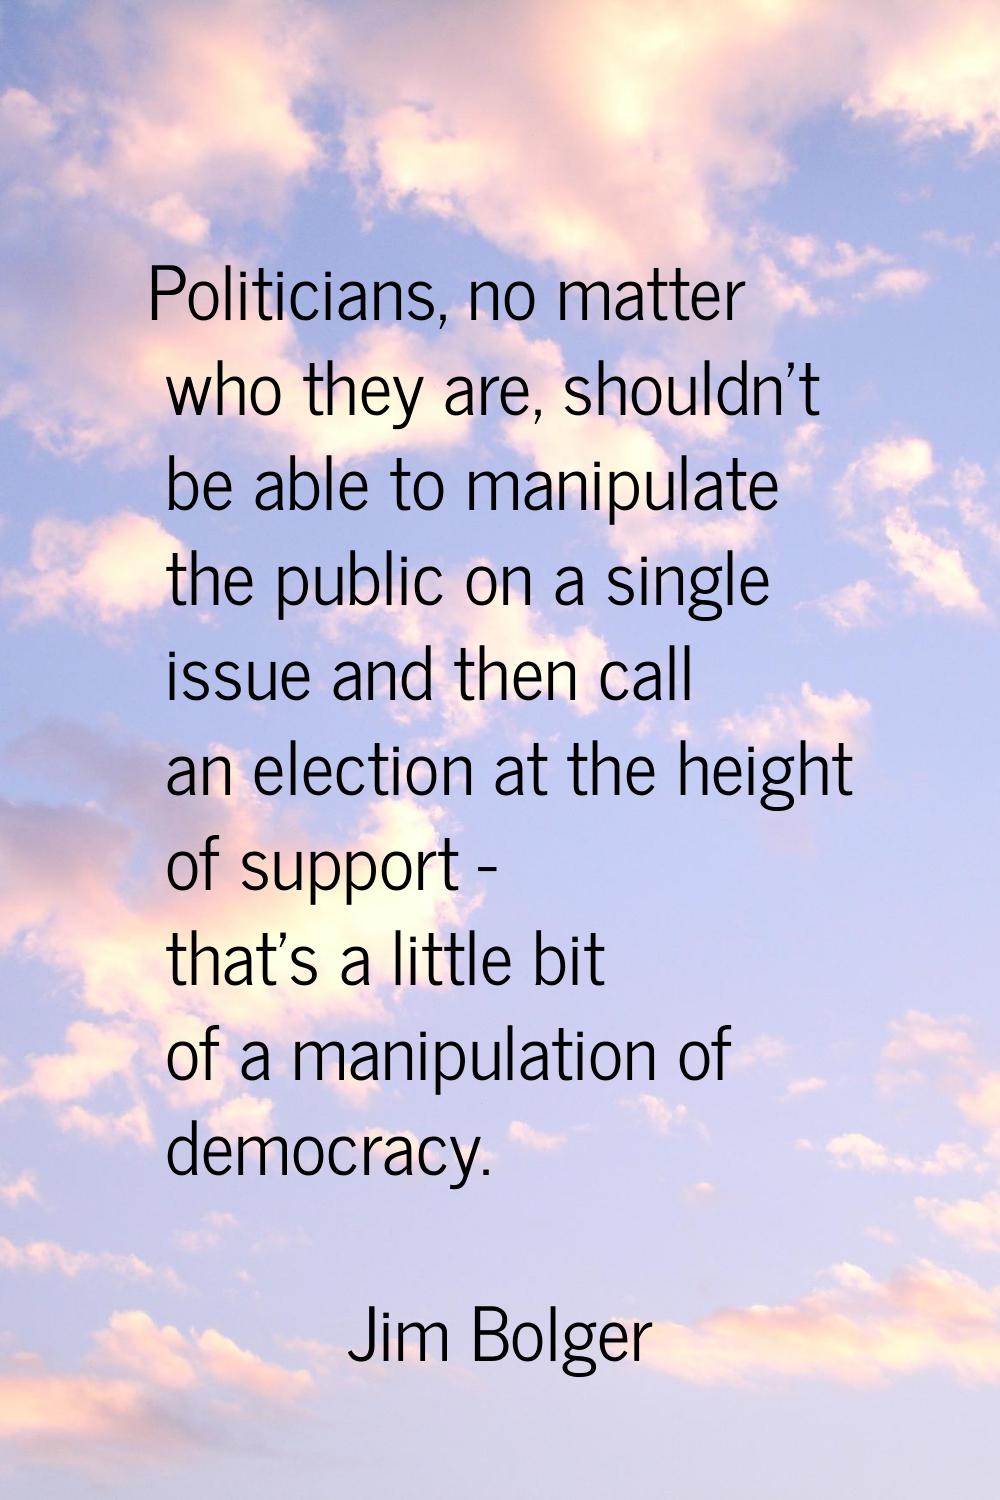 Politicians, no matter who they are, shouldn't be able to manipulate the public on a single issue a